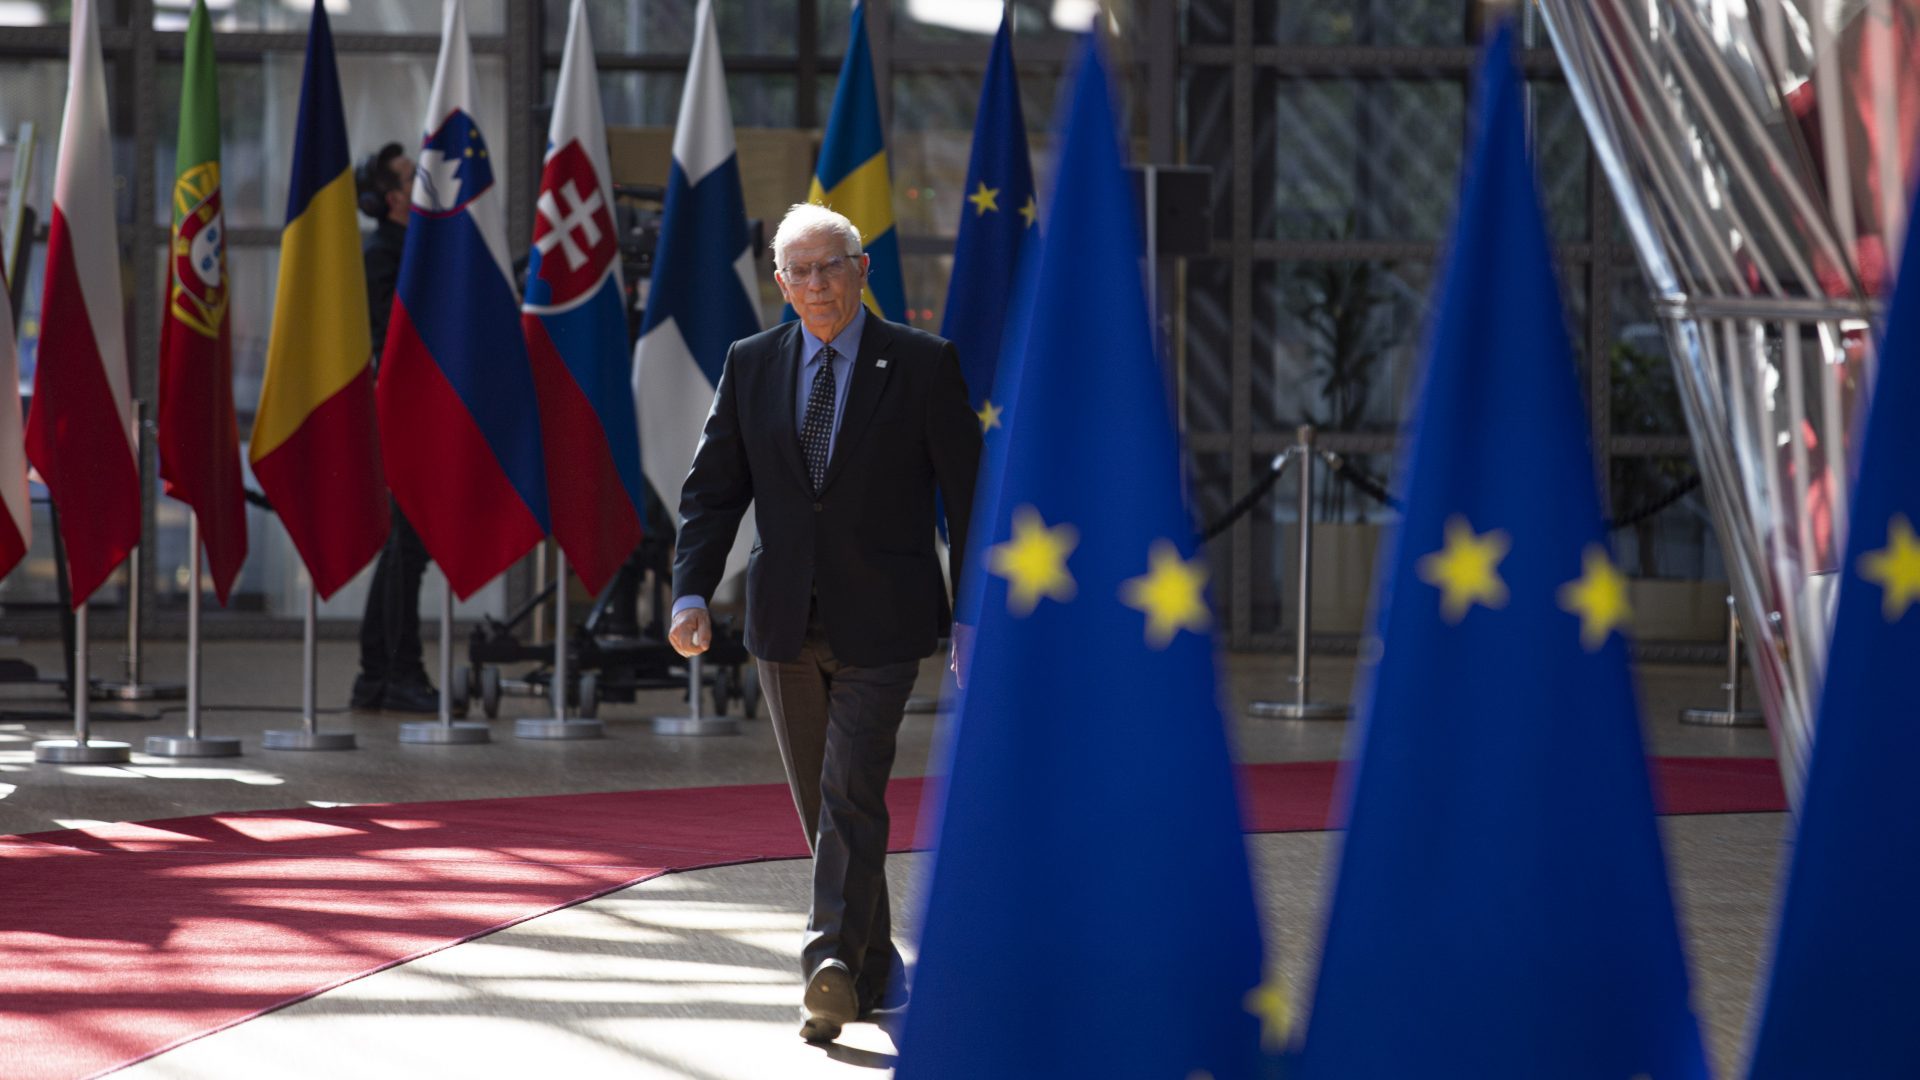 Josep Borrell, the High Representative of the Union for Foreign Affairs and Security Policy arrives at the extraordinary special EU summit about Ukraine, Energy and Defence. Photo: Nicolas Economou/NurPhoto via Getty Images